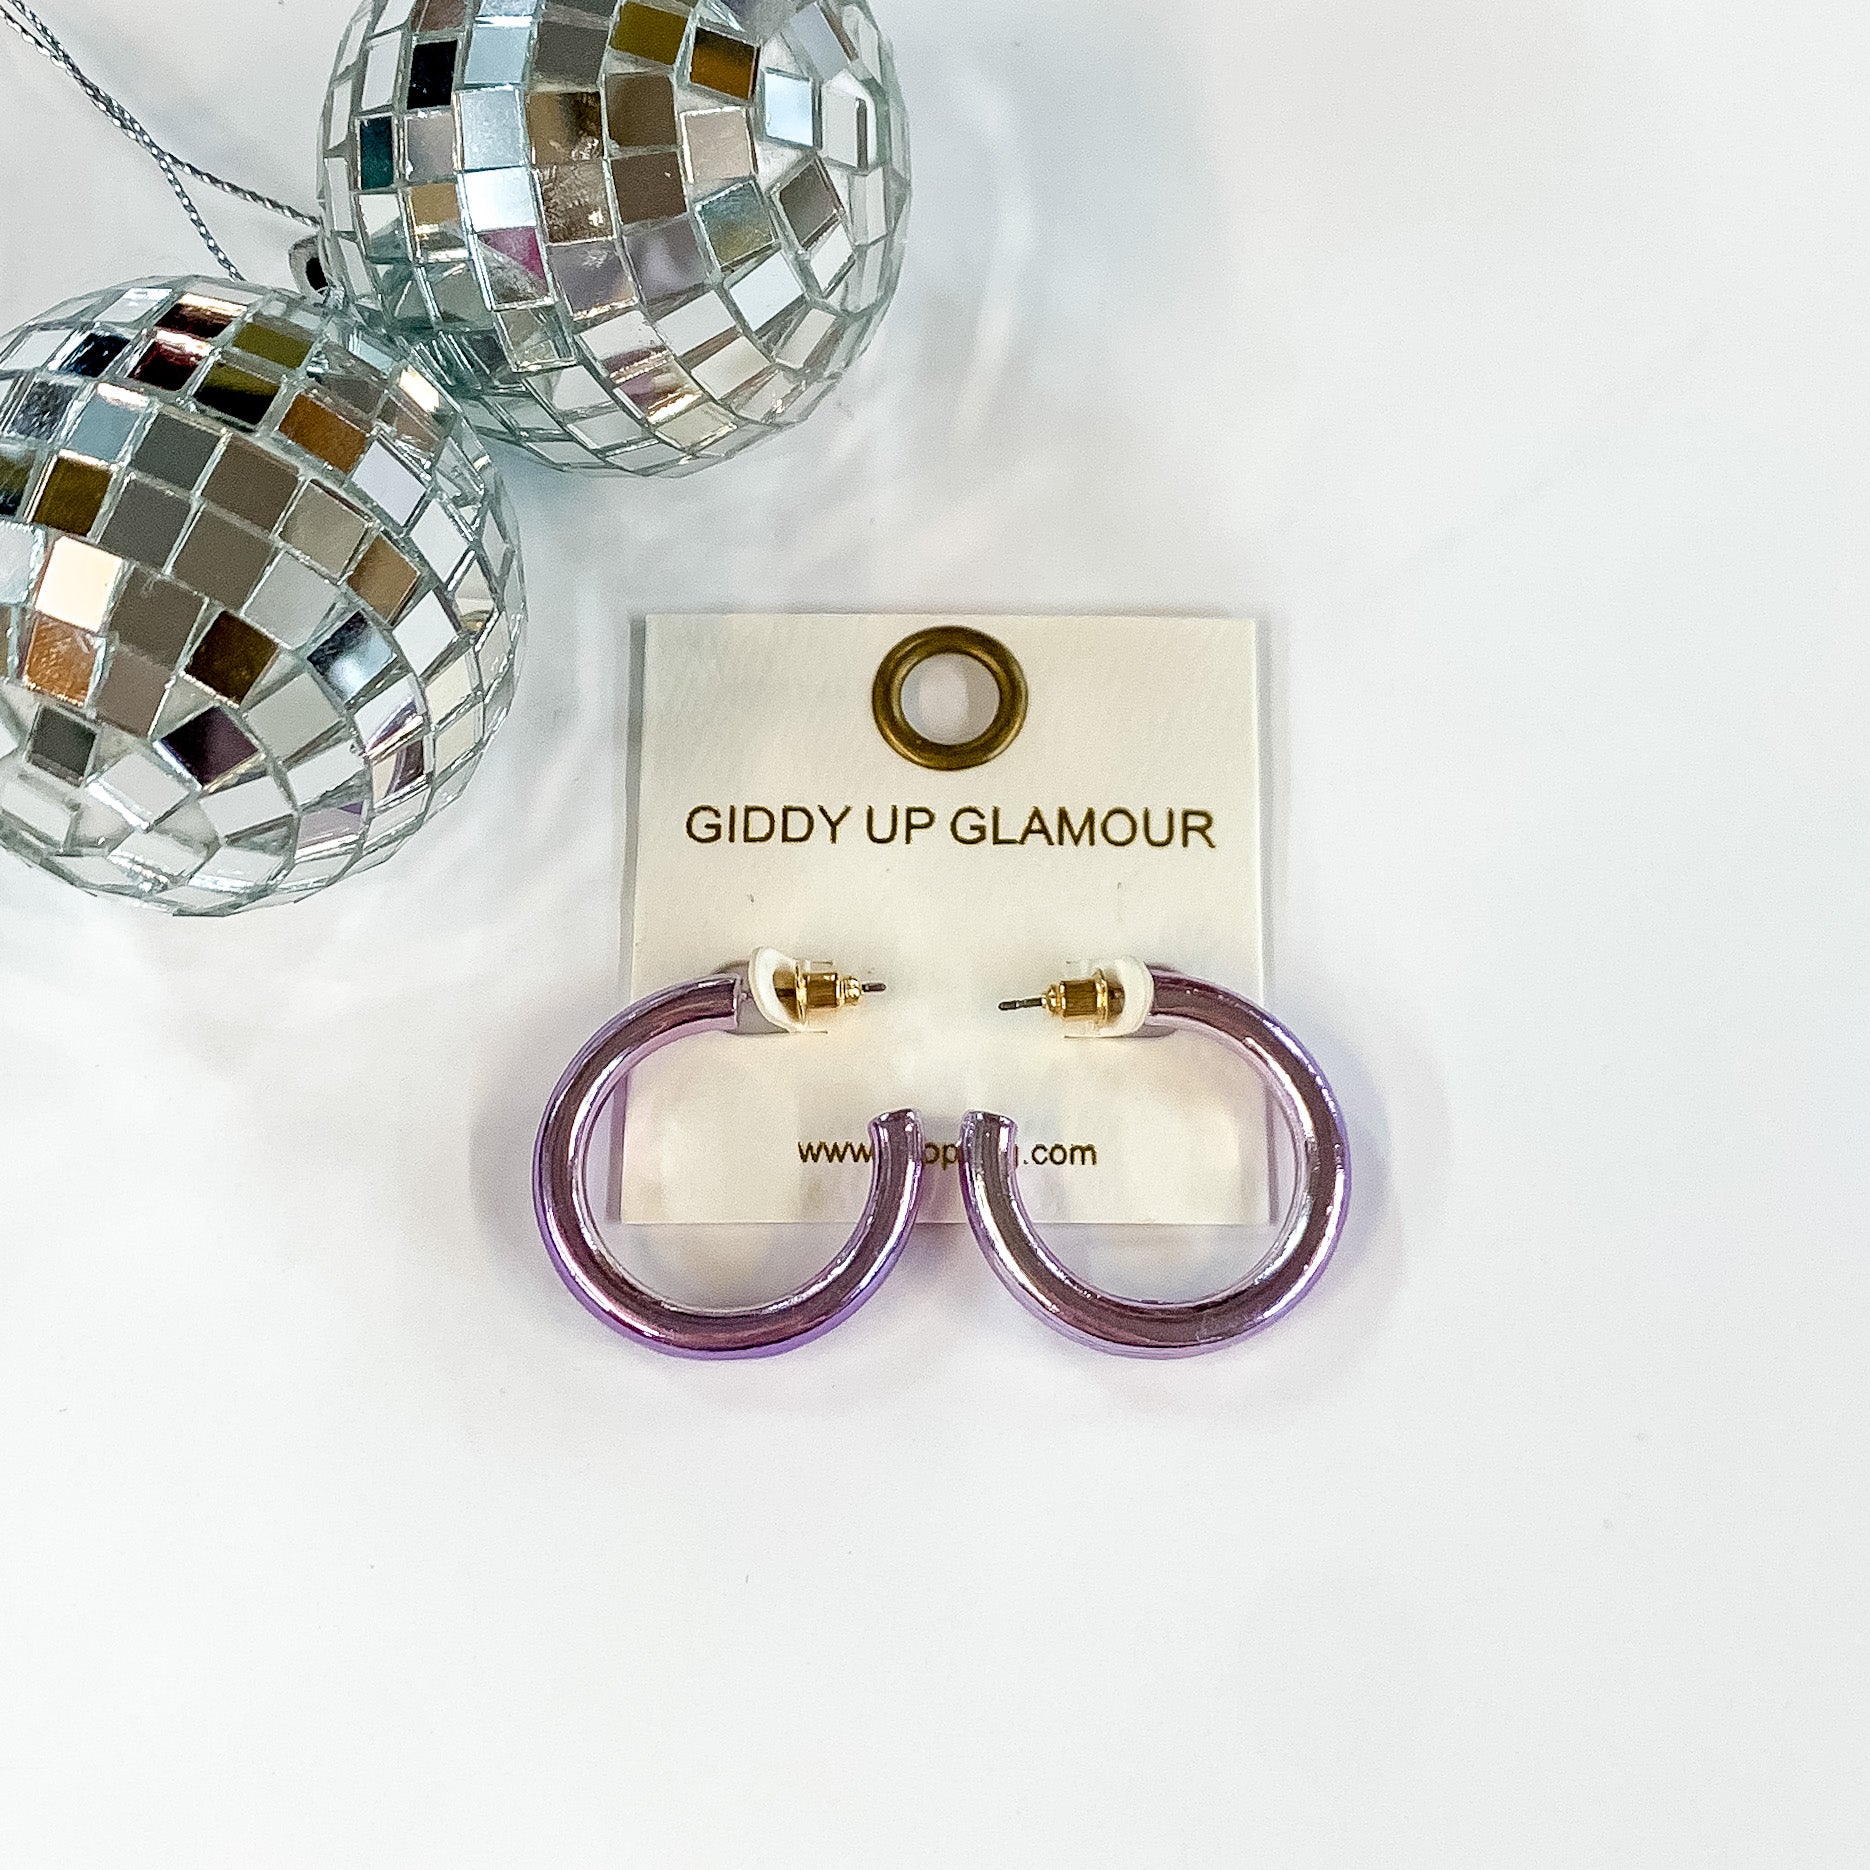 Light Up Small Neon Hoop Earrings In Lavender. Pictured on a white background with disco balls in the top left corner. 